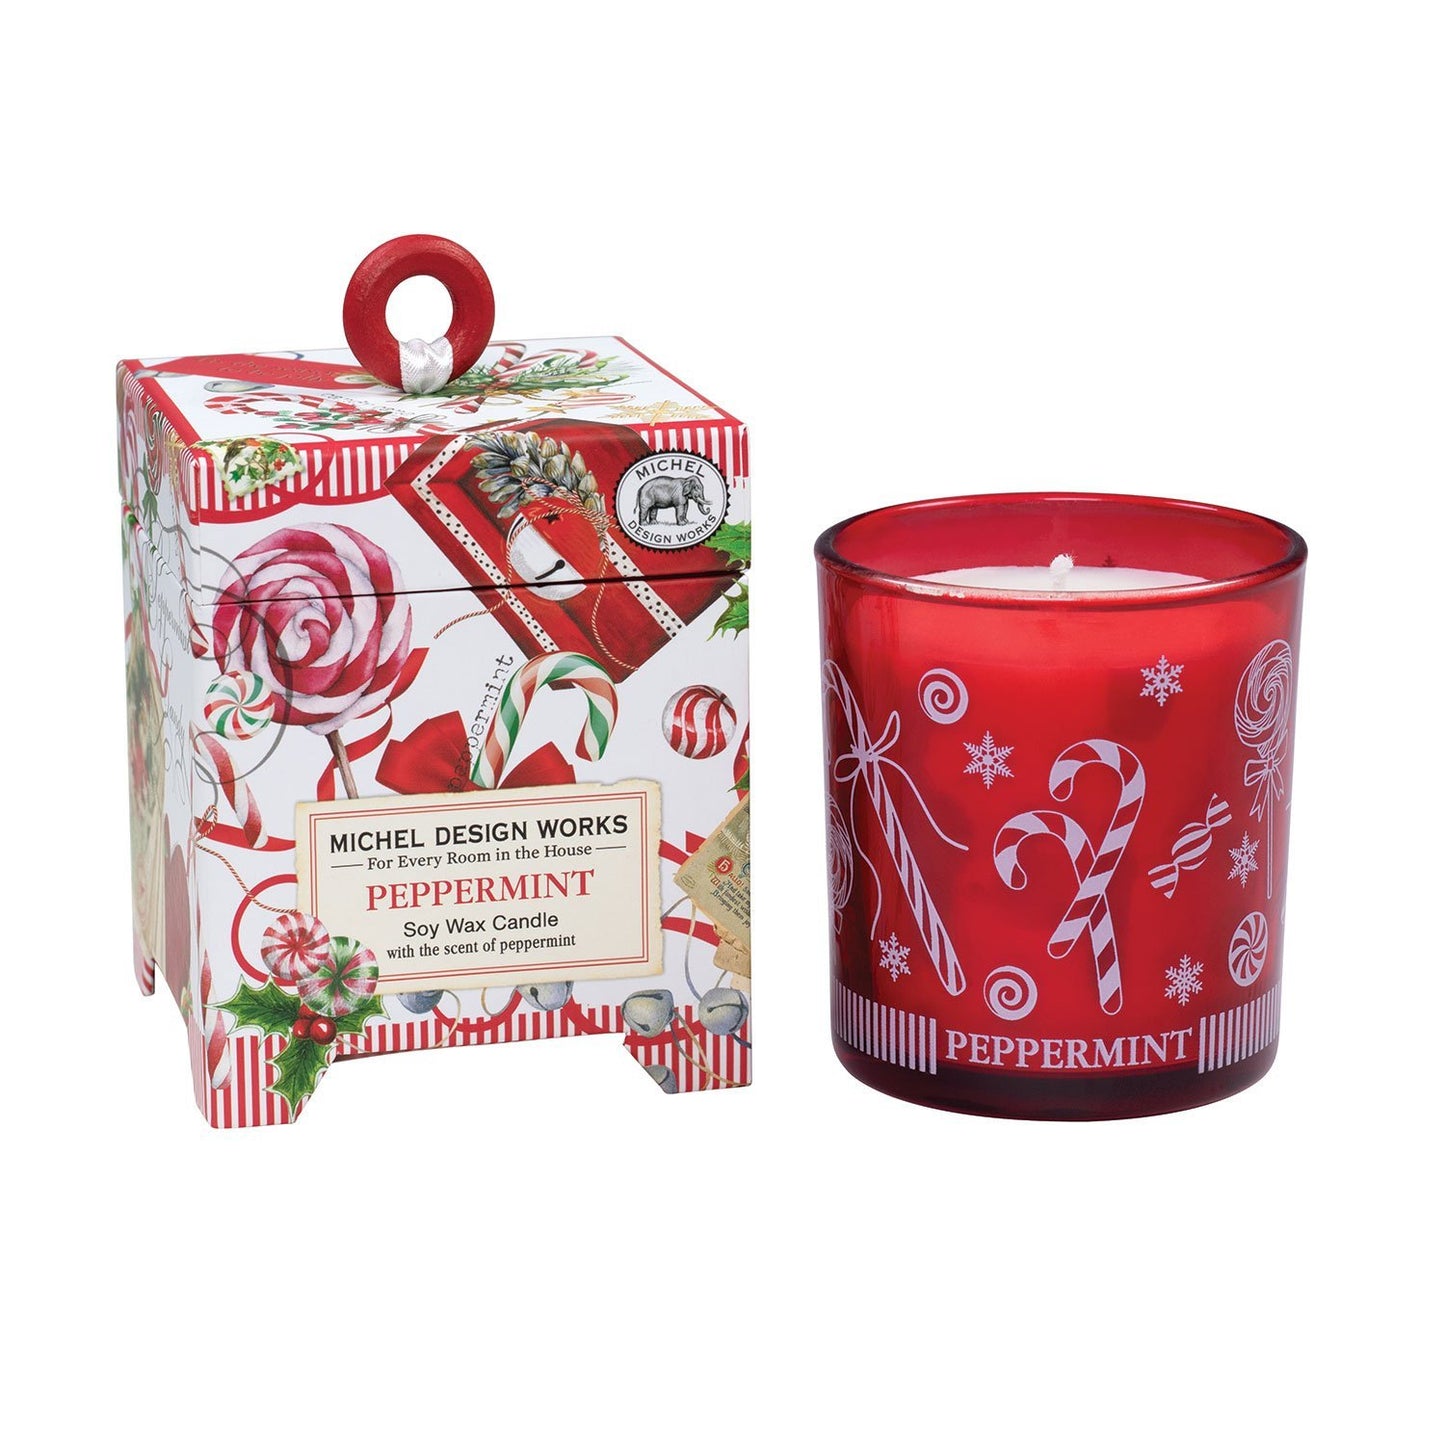 Peppermint 6.5oz. Soy Wax Candle